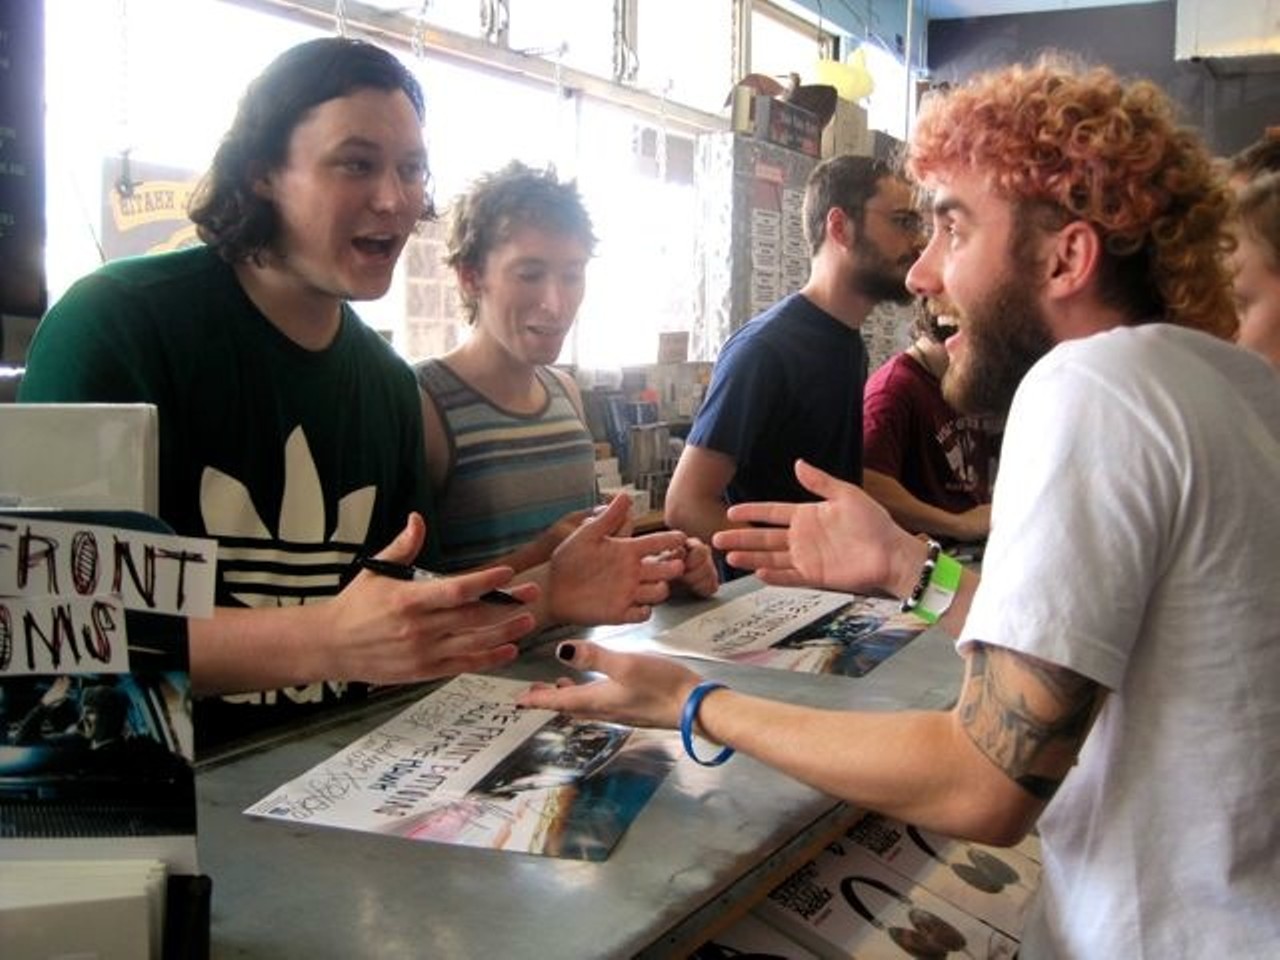 In-Store Performance of The Front Bottoms at Park Ave CD's